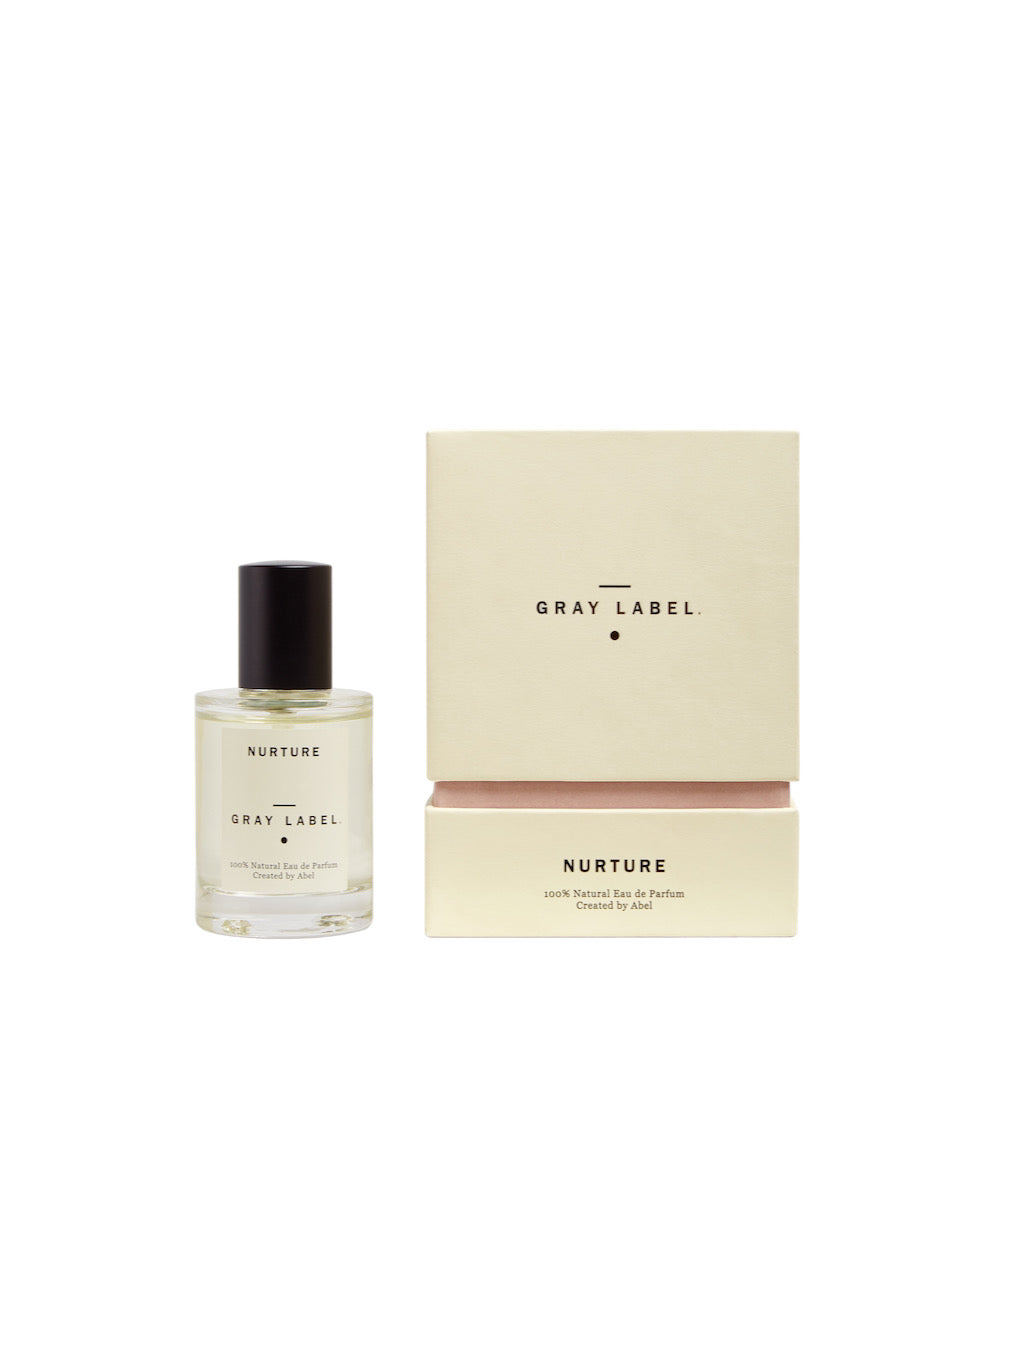 A bottle of NURTURE - grey label fragrance with a box next to it.